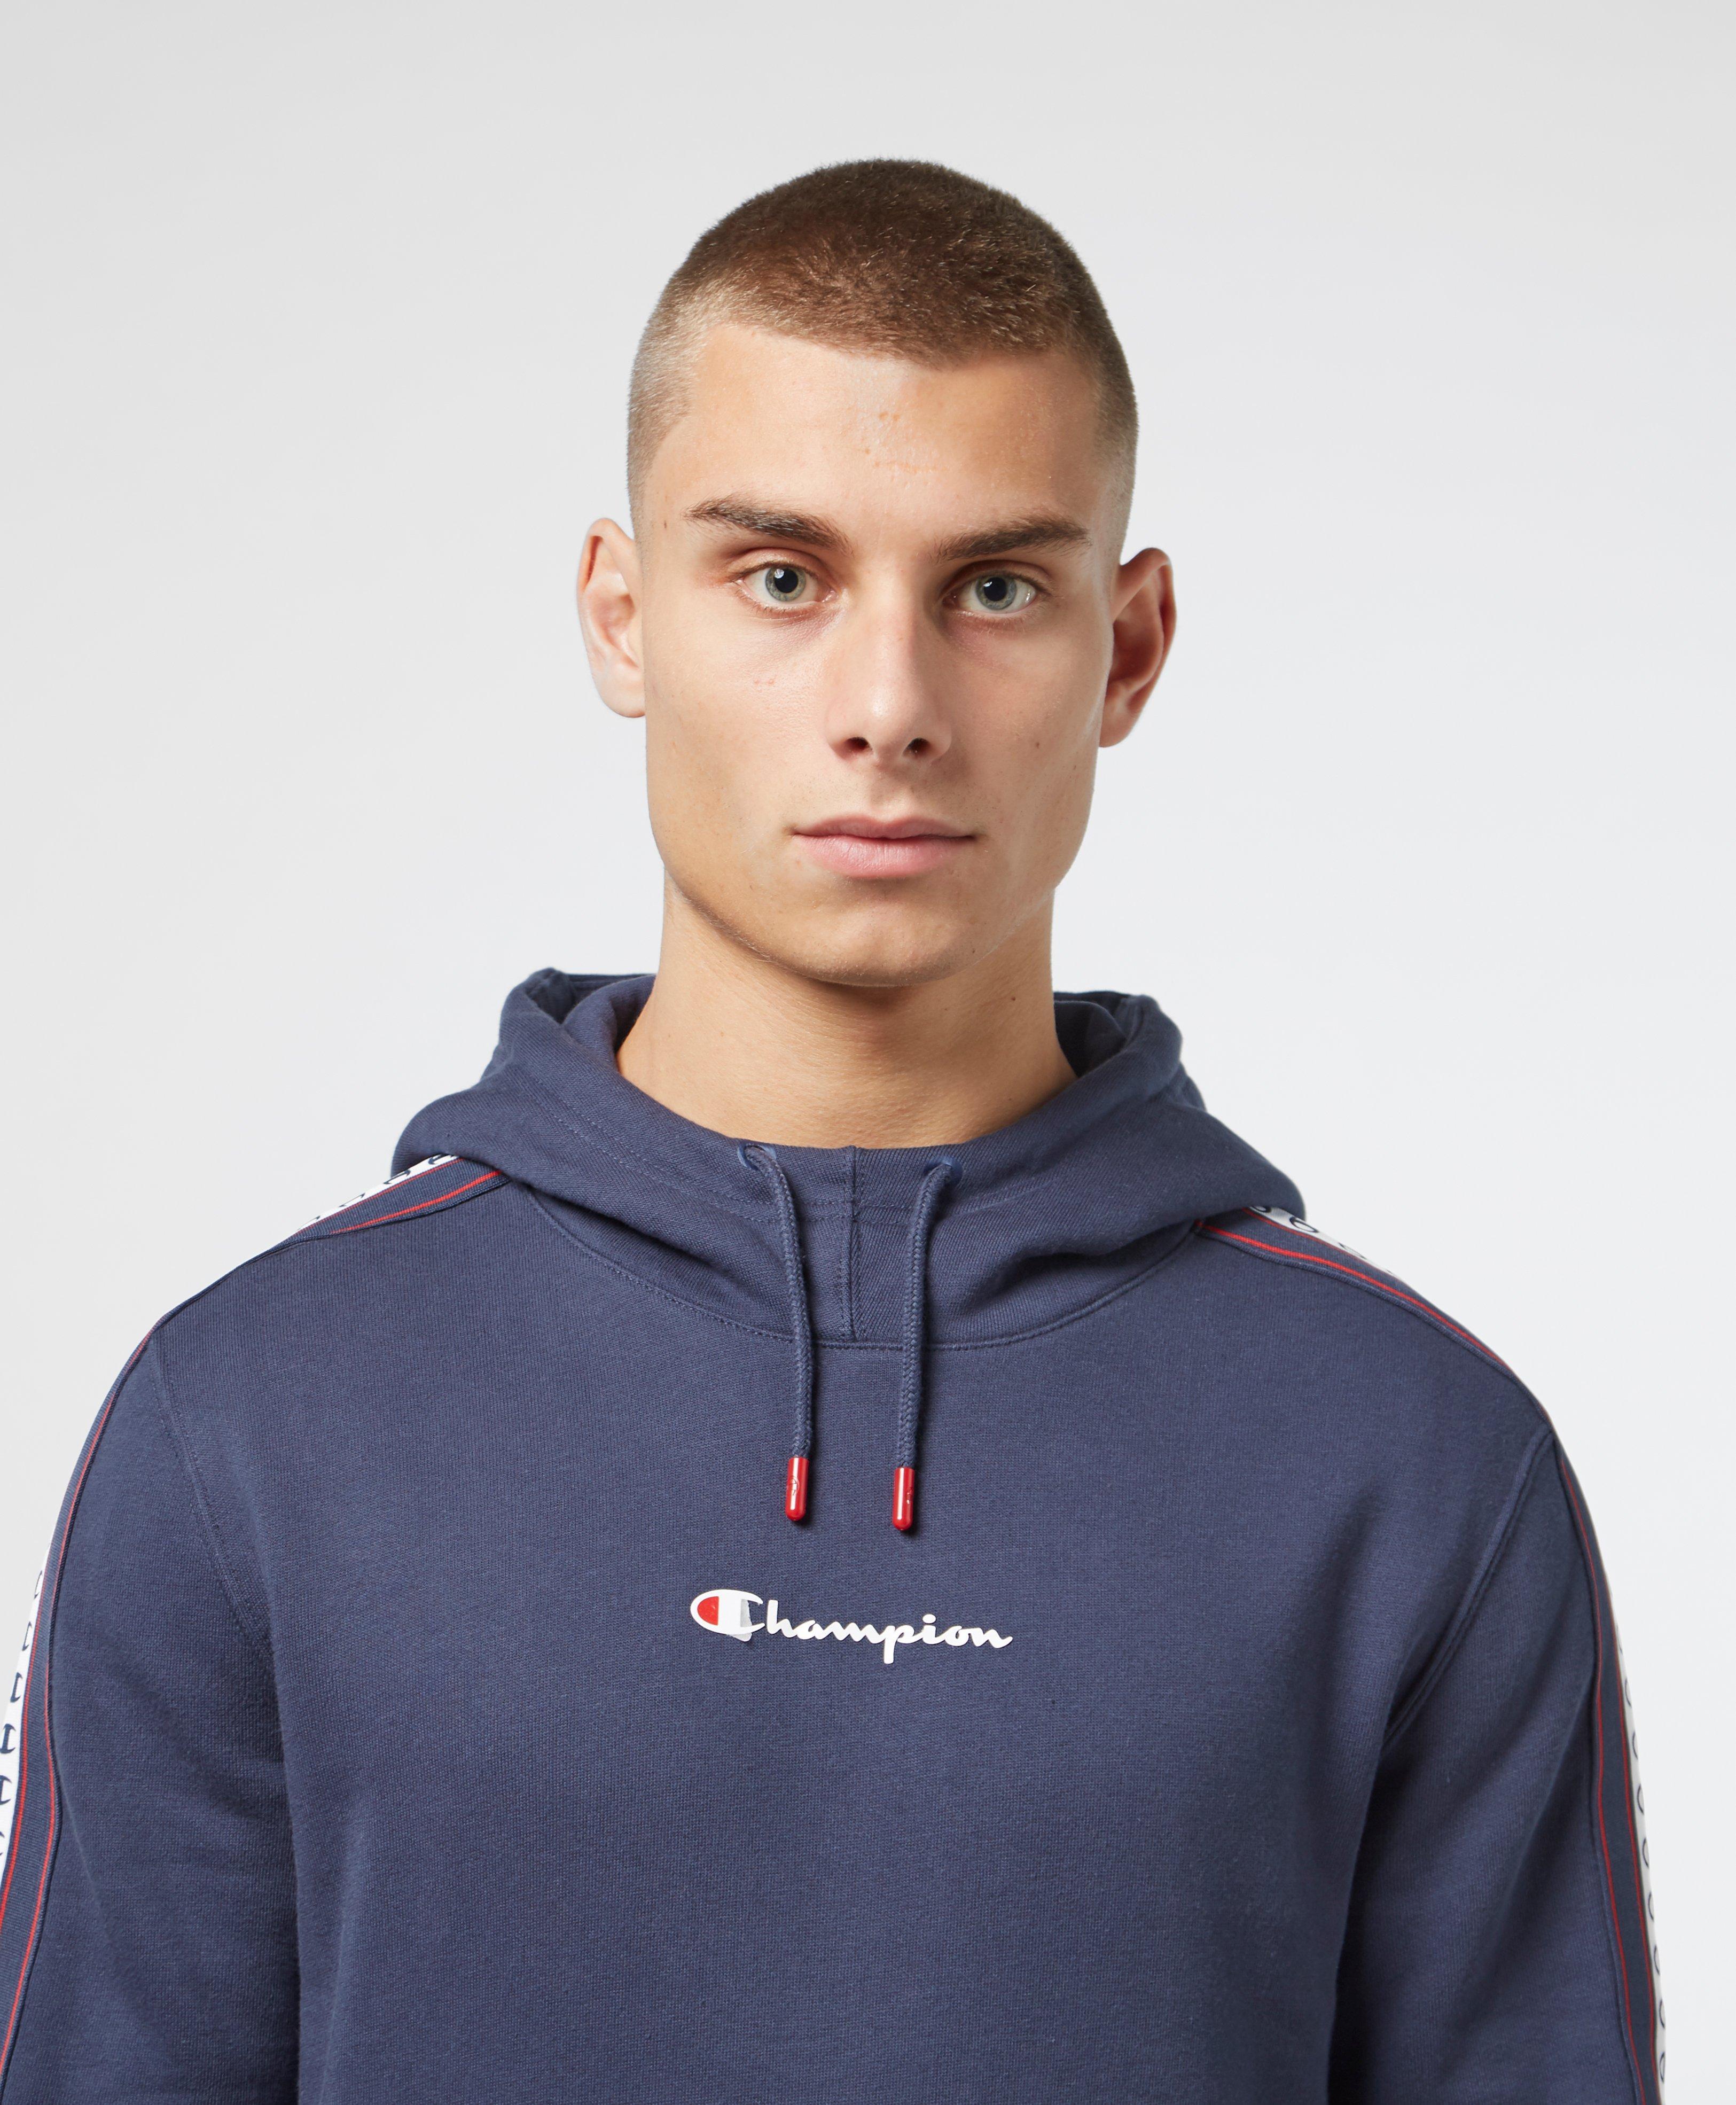 Champion Rochester Overhead Hoodie Cheap Sale, GET 52% OFF, ricettecuco.it